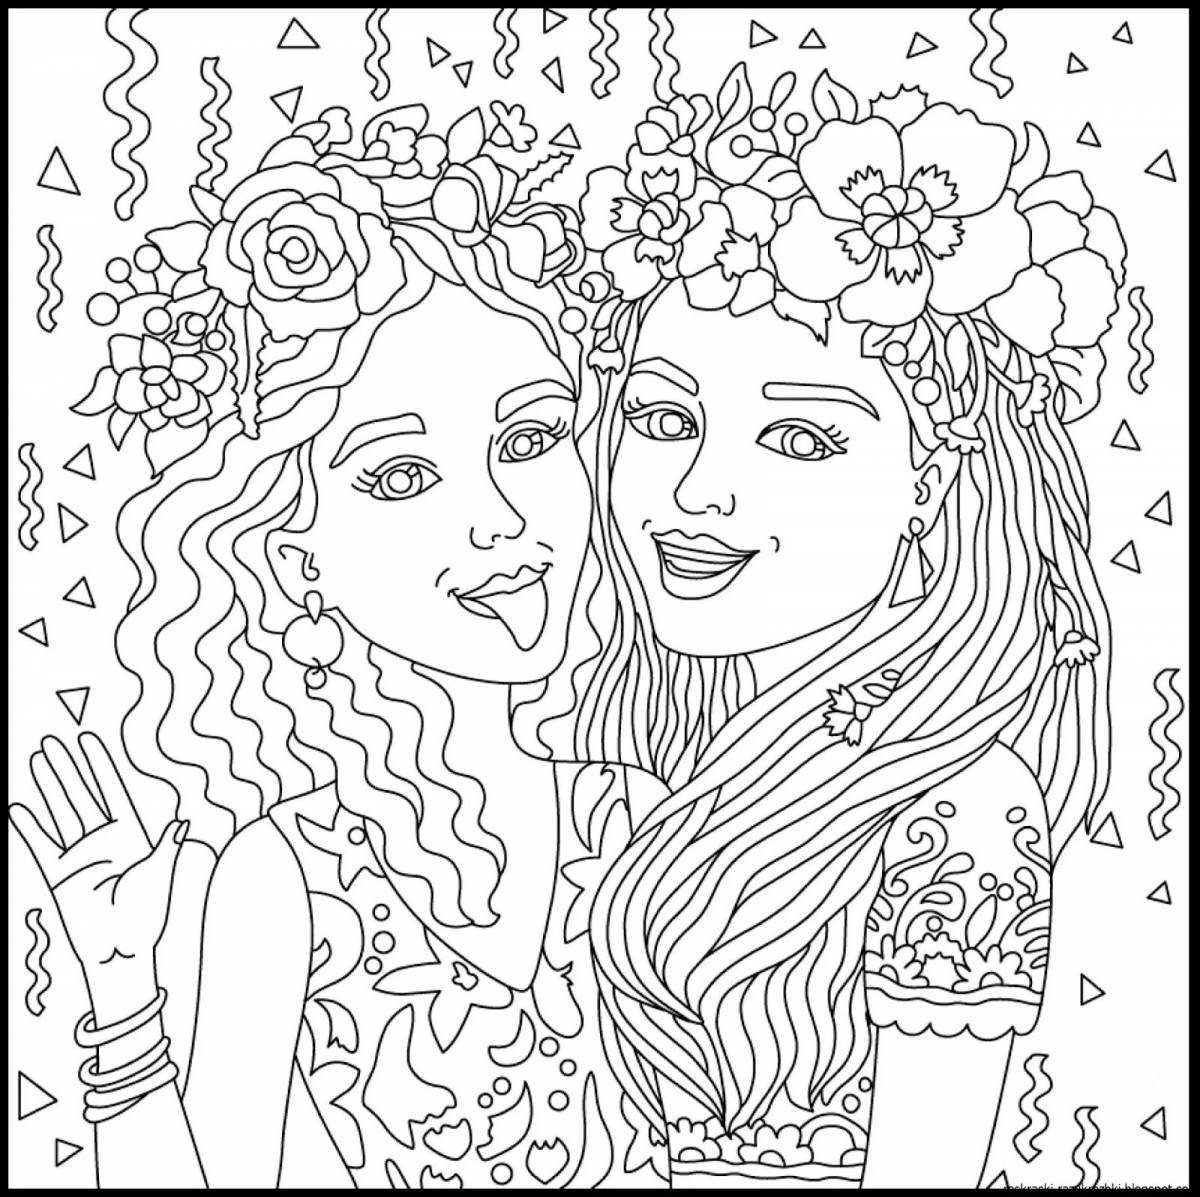 Cute coloring book for girls 15-17 years old